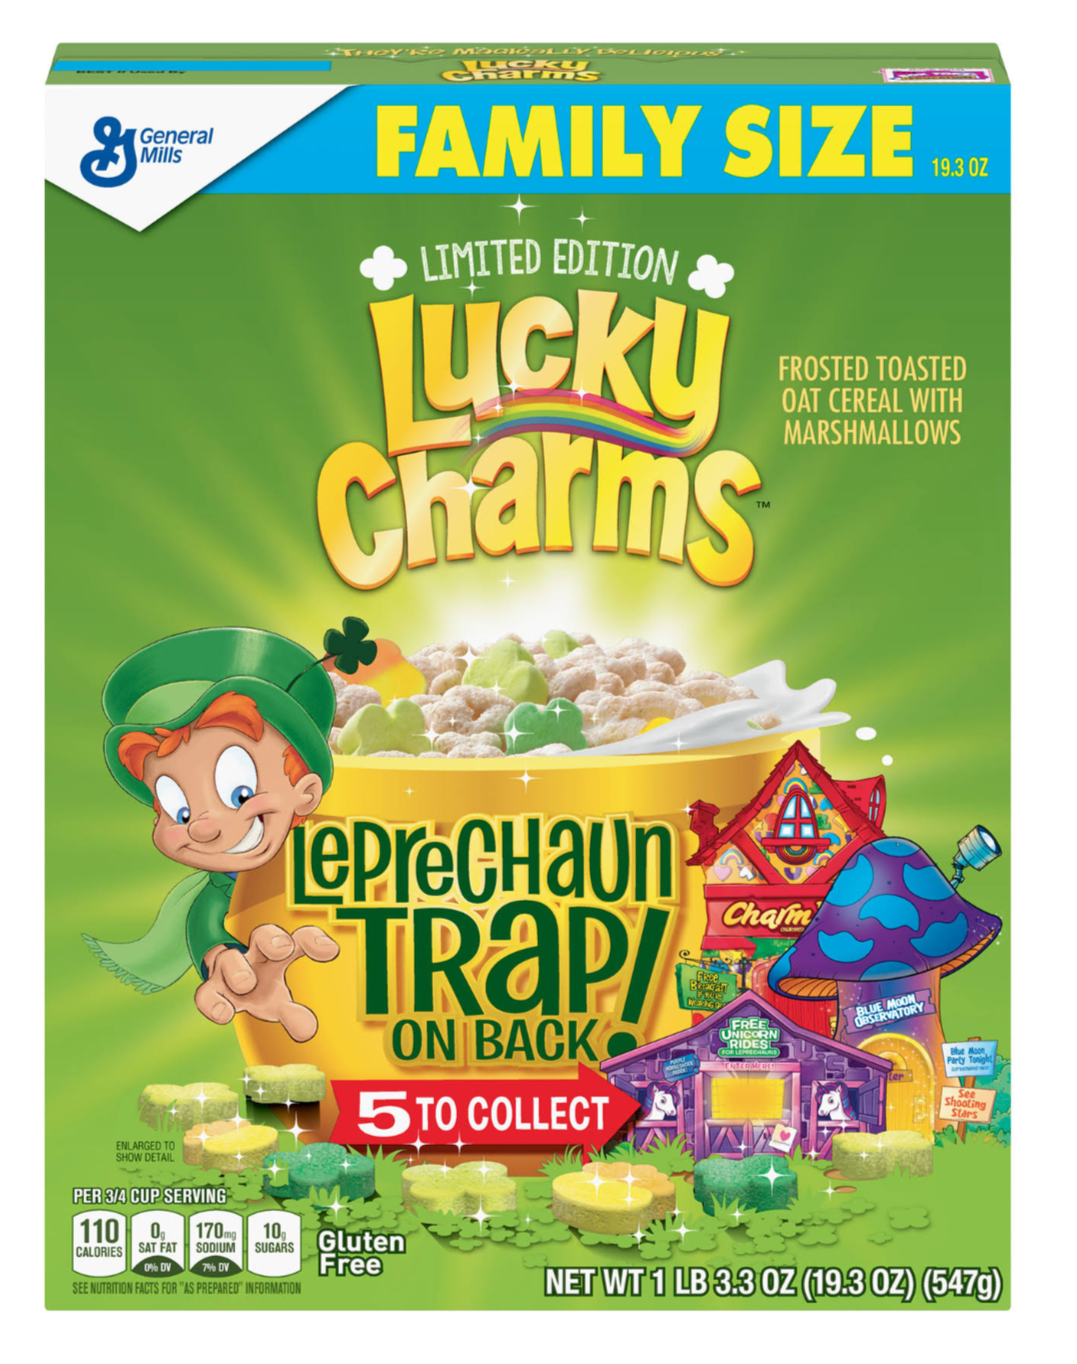 News: St. Patrick's Day Lucky Charms are Back!